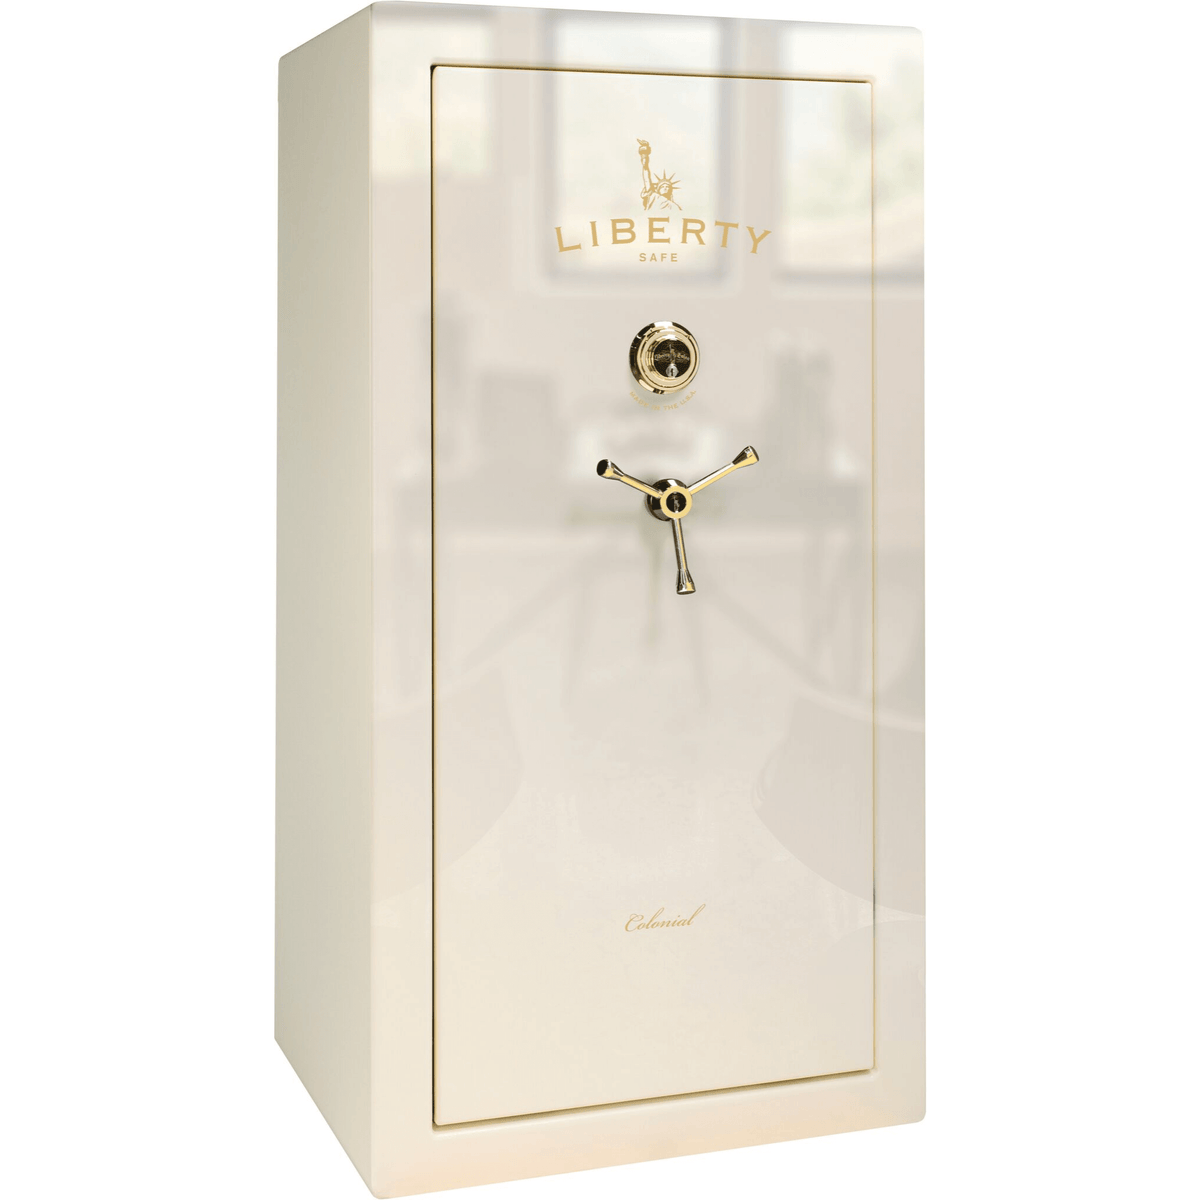 Liberty Colonial 23 Safe in White Gloss with Brass Mechanical Lock.